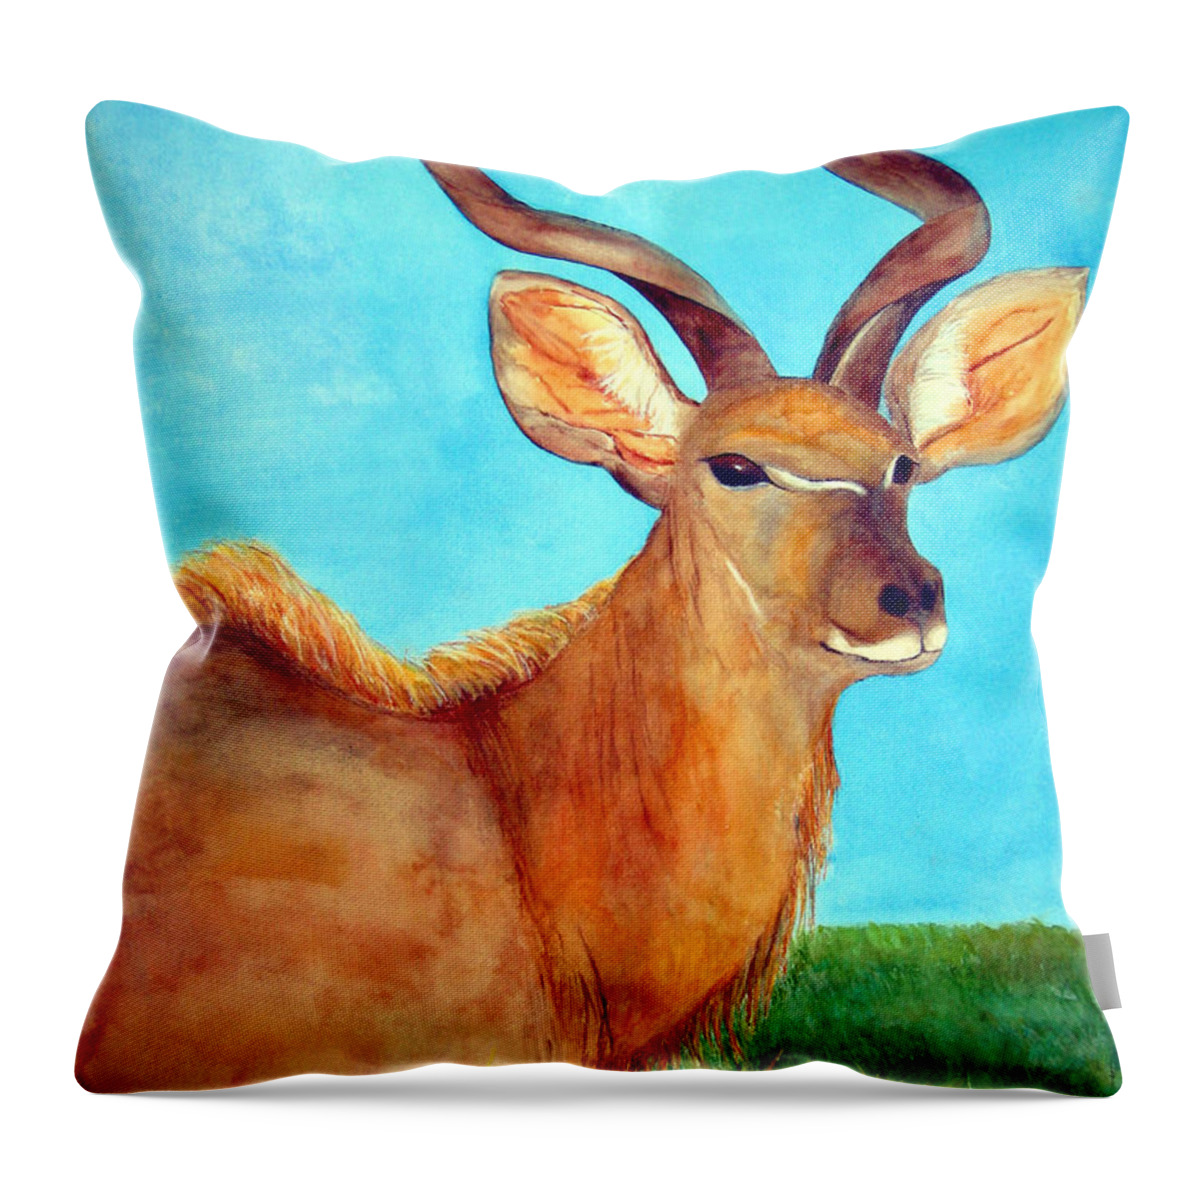 Kudu Throw Pillow featuring the painting Kudu by Patricia Beebe